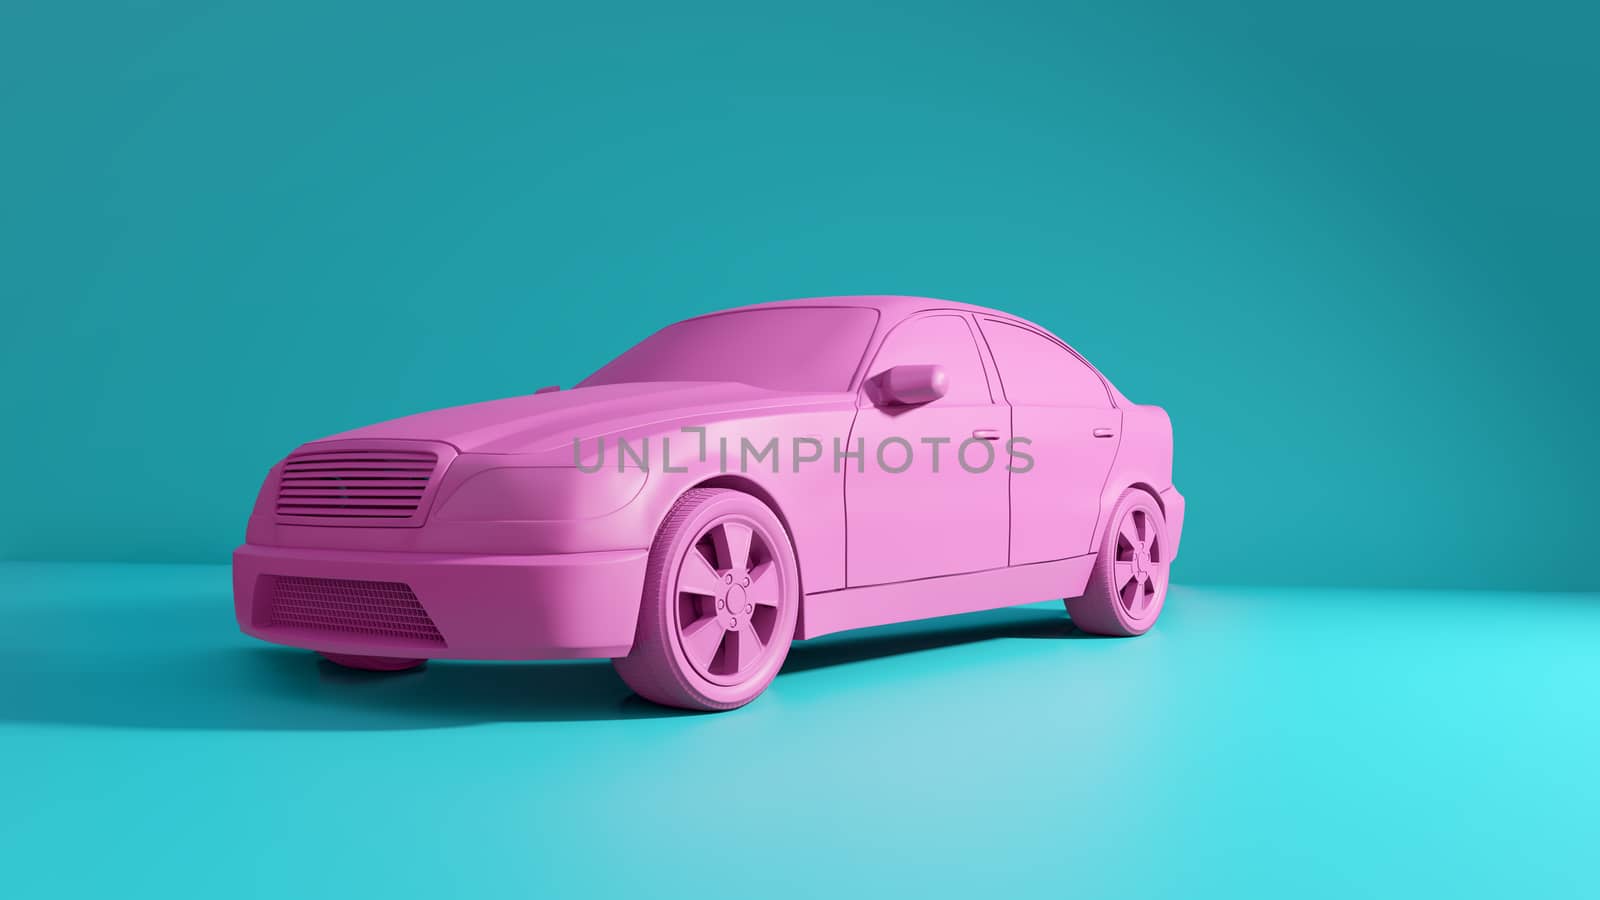 Styled 3D illustration of the pink car on blue background